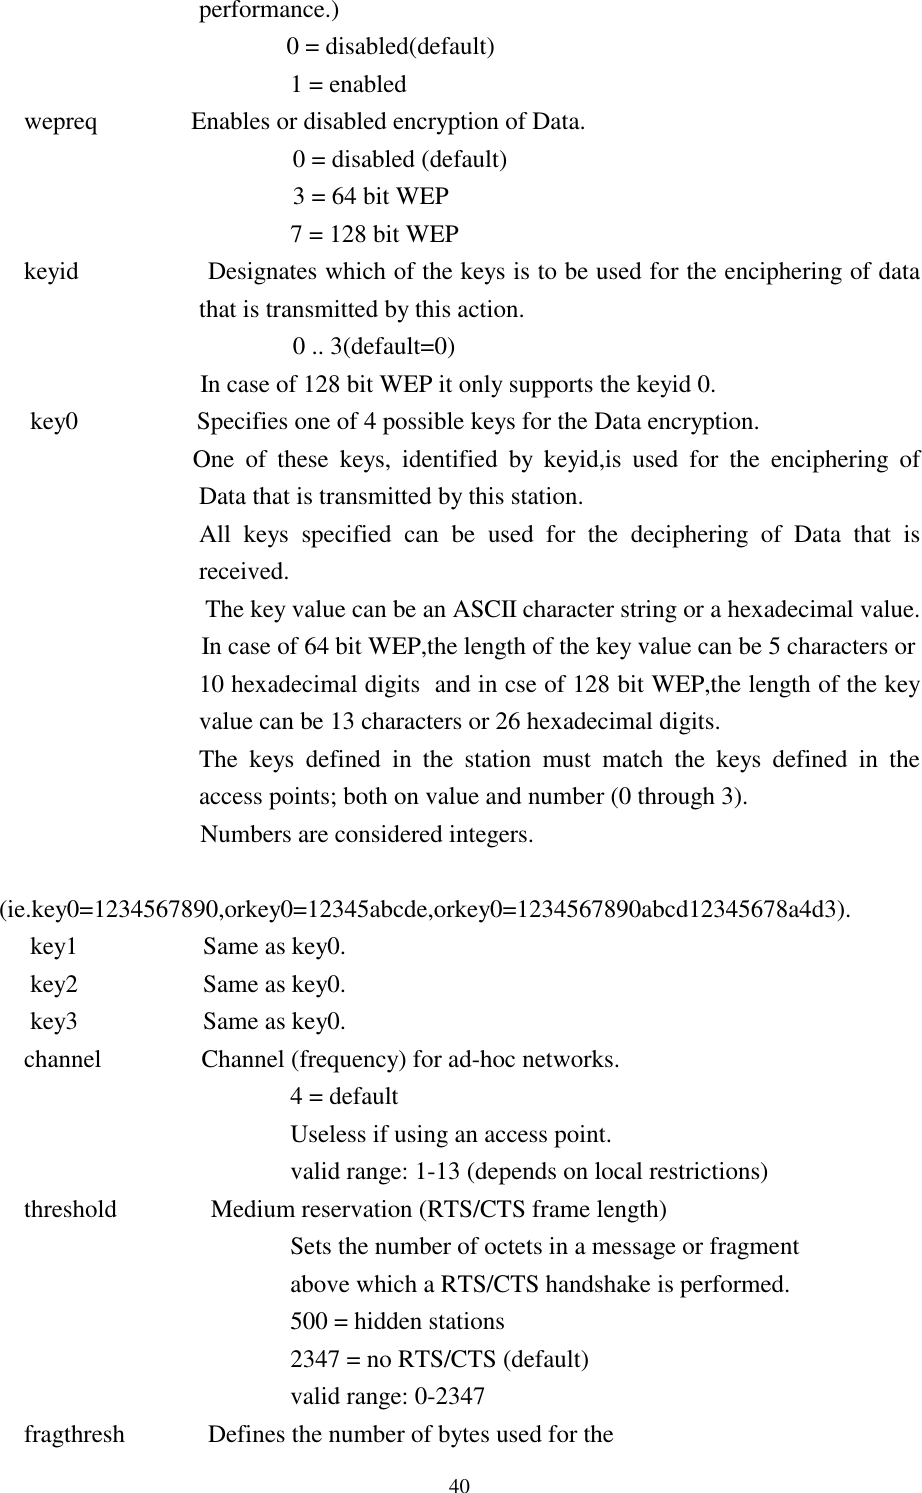  40 performance.)                                               0 = disabled(default)           1 = enabled     wepreq               Enables or disabled encryption of Data.                                                0 = disabled (default)                                                3 = 64 bit WEP           7 = 128 bit WEP      keyid                 Designates which of the keys is to be used for the enciphering of data that is transmitted by this action.                                                0 .. 3(default=0)                     In case of 128 bit WEP it only supports the keyid 0.      key0                   Specifies one of 4 possible keys for the Data encryption.                                One  of  these  keys,  identified  by  keyid,is  used  for  the  enciphering  of Data that is transmitted by this station.         All  keys  specified  can  be  used  for  the  deciphering  of  Data  that  is received.  The key value can be an ASCII character string or a hexadecimal value.         In case of 64 bit WEP,the length of the key value can be 5 characters or    10 hexadecimal digits  and in cse of 128 bit WEP,the length of the key value can be 13 characters or 26 hexadecimal digits.    The keys defined in the station must match the keys defined in the access points; both on value and number (0 through 3).                     Numbers are considered integers.                                  (ie.key0=1234567890,orkey0=12345abcde,orkey0=1234567890abcd12345678a4d3).      key1                    Same as key0.      key2                    Same as key0.      key3                    Same as key0.     channel      Channel (frequency) for ad-hoc networks.           4 = default           Useless if using an access point.           valid range: 1-13 (depends on local restrictions)     threshold               Medium reservation (RTS/CTS frame length)           Sets the number of octets in a message or fragment           above which a RTS/CTS handshake is performed.           500 = hidden stations           2347 = no RTS/CTS (default)           valid range: 0-2347     fragthresh       Defines the number of bytes used for the 